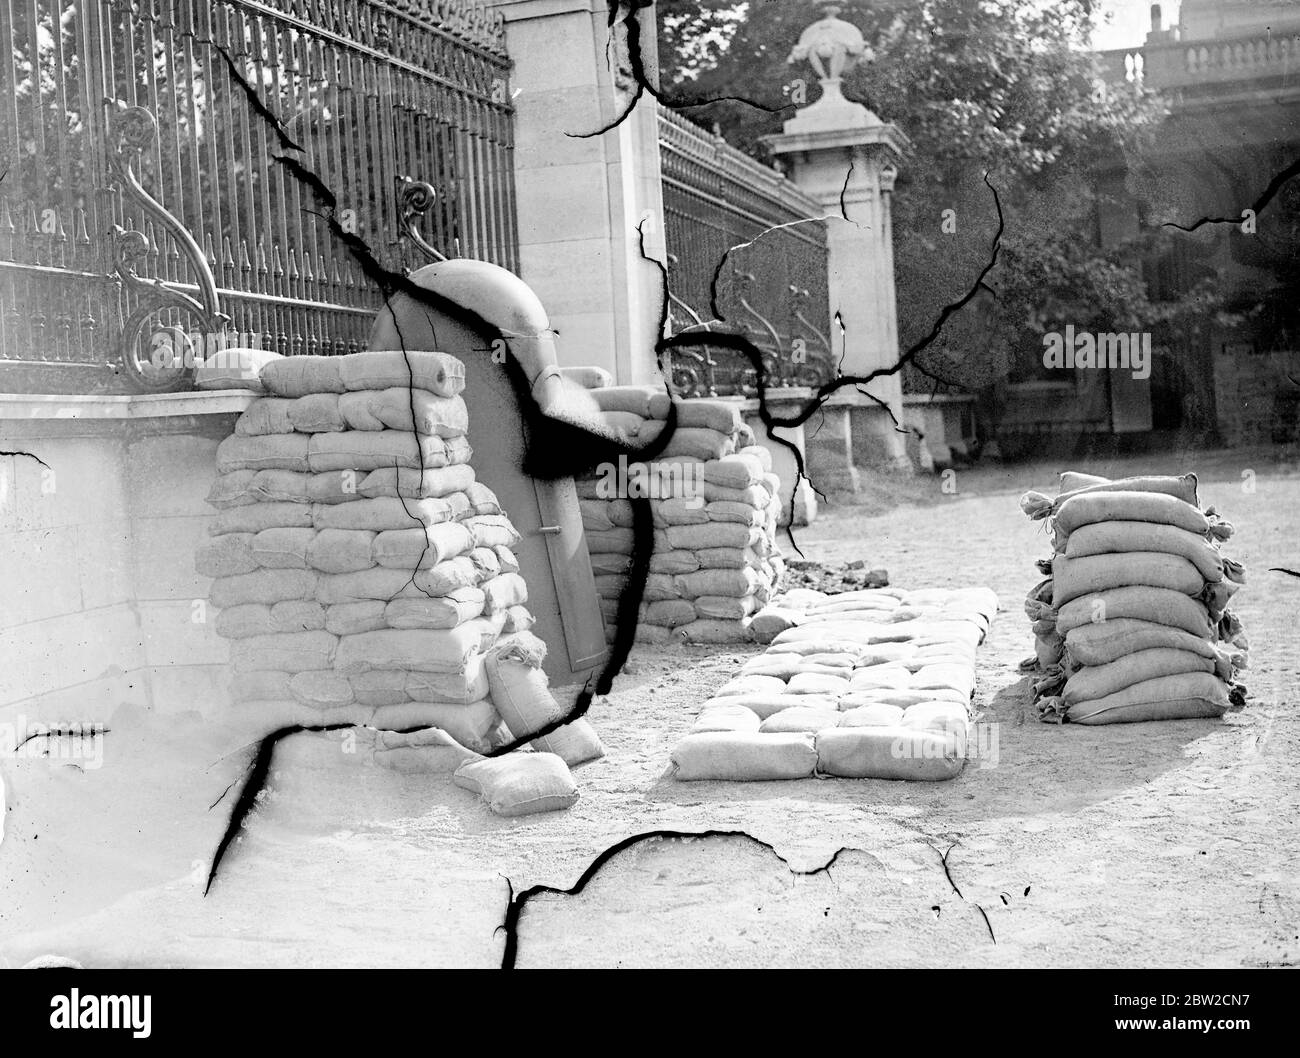 Air raid shelters are being constructed or placed in position at the Royal palaces in London. Special types of steel shelter - similar to those for the use of key men in air raids - have been placed in position for the sentries. A steel shelter for the sentry placed amid a pile of sandbags in Buckingham Palace courtyard. 29 August 1939 Stock Photo